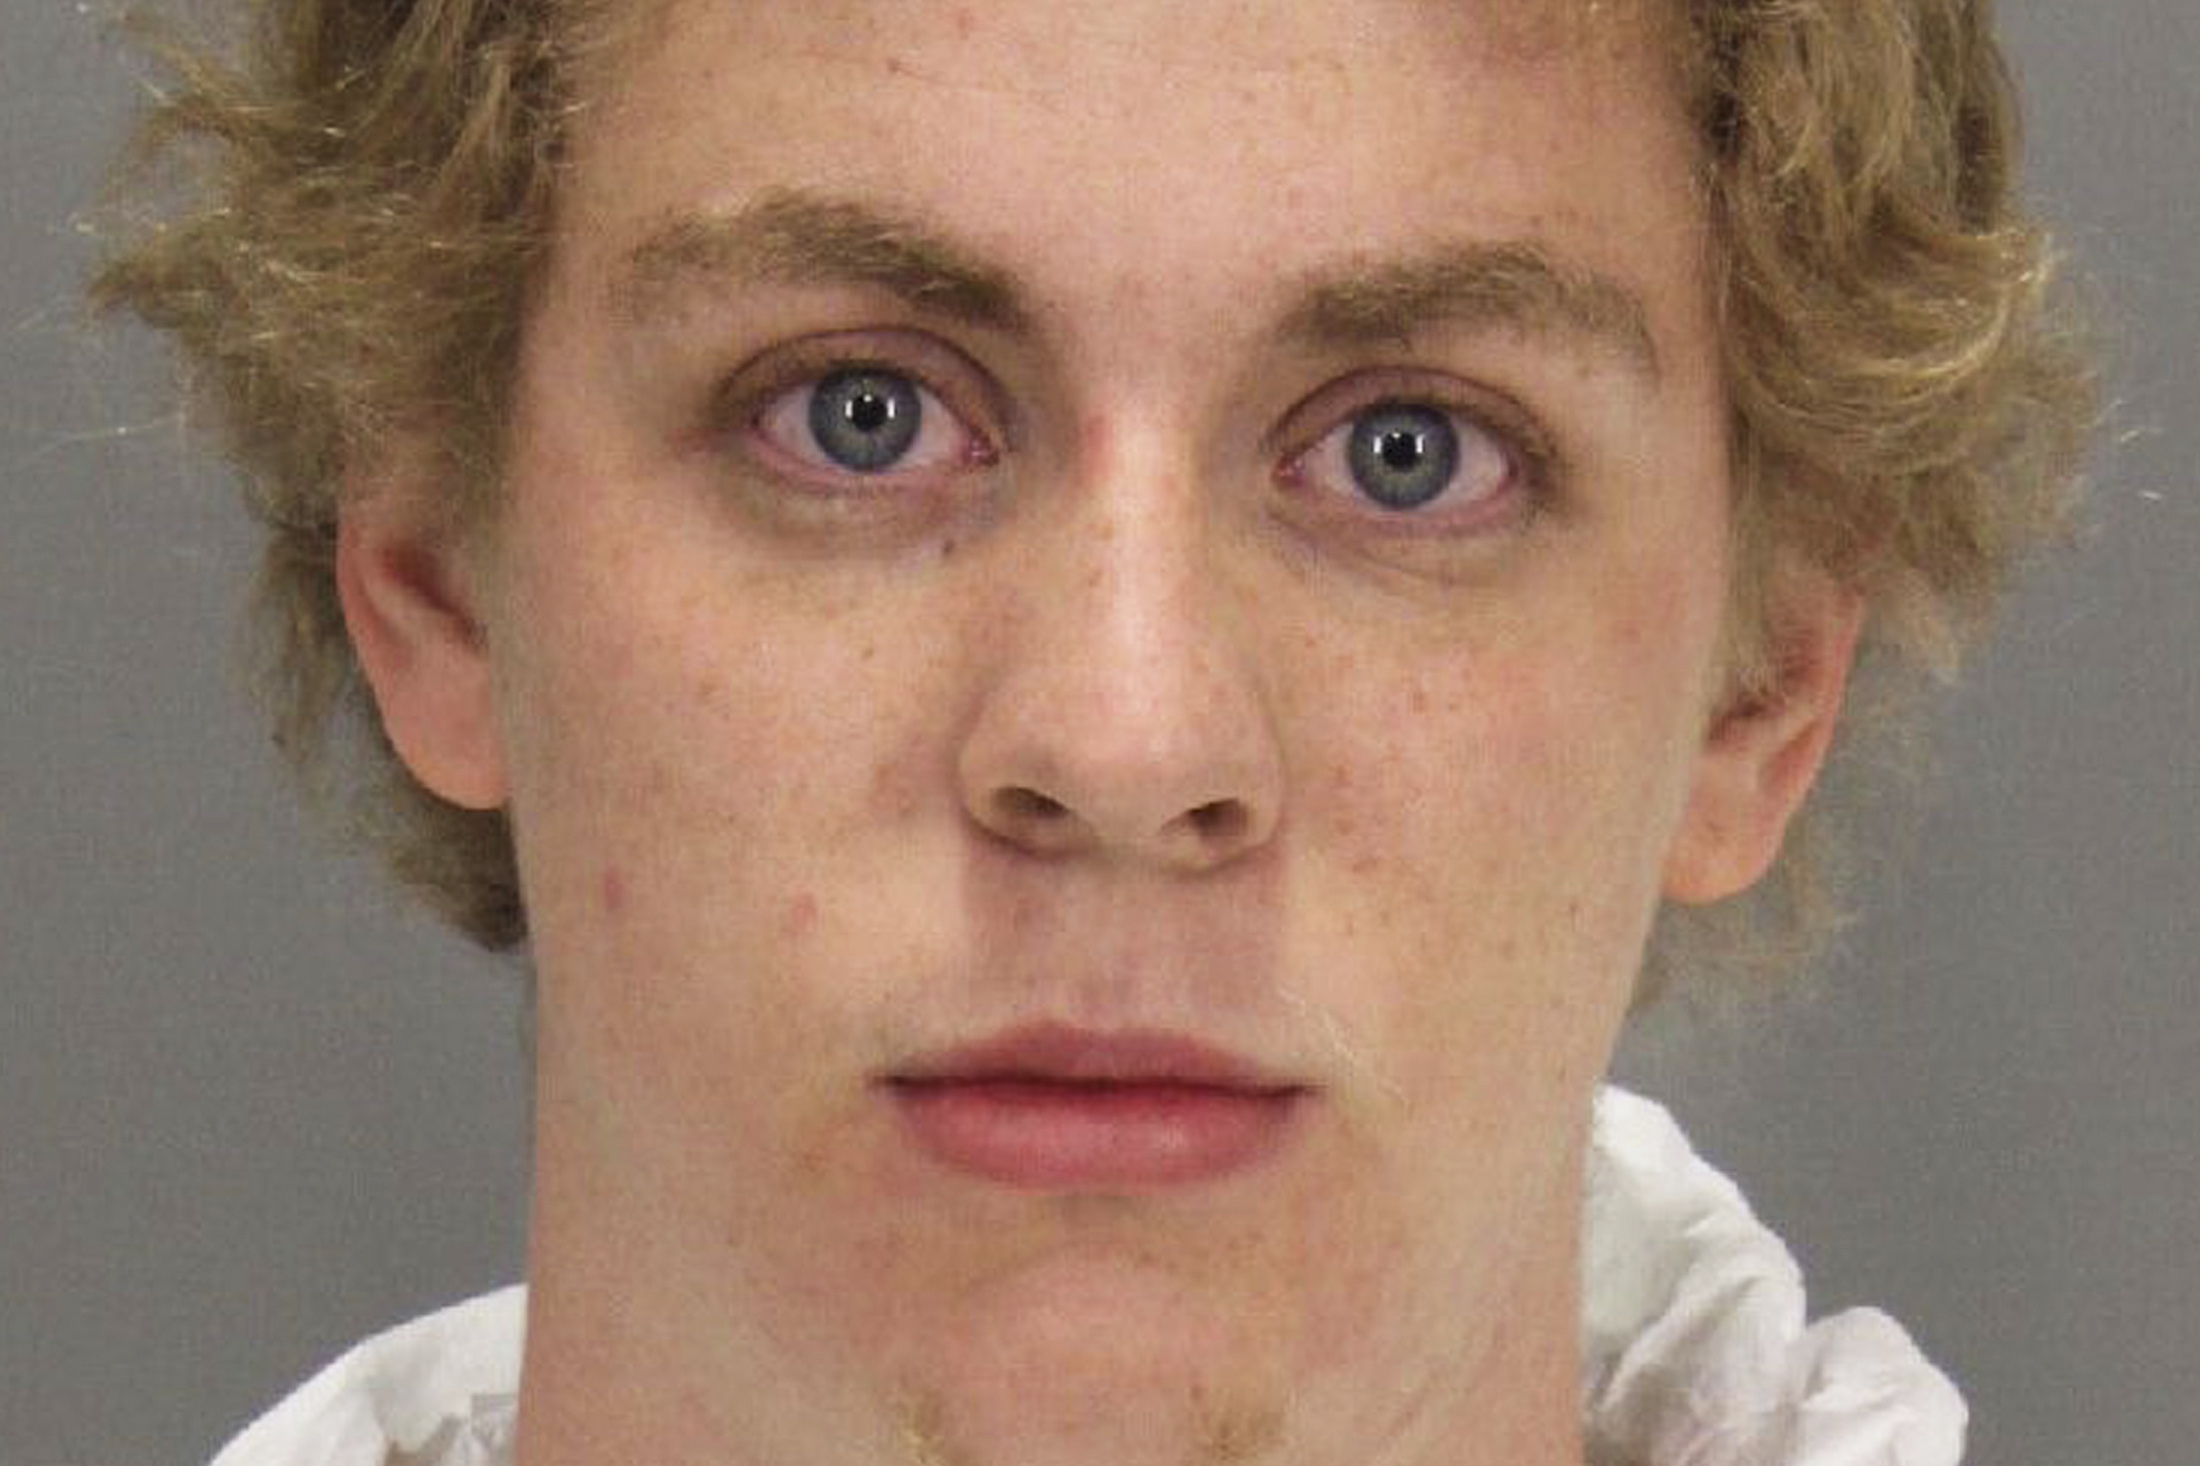 Brock Turner in his Jan. 2015 booking photo, released by the Santa Clara County Sheriff's Office.